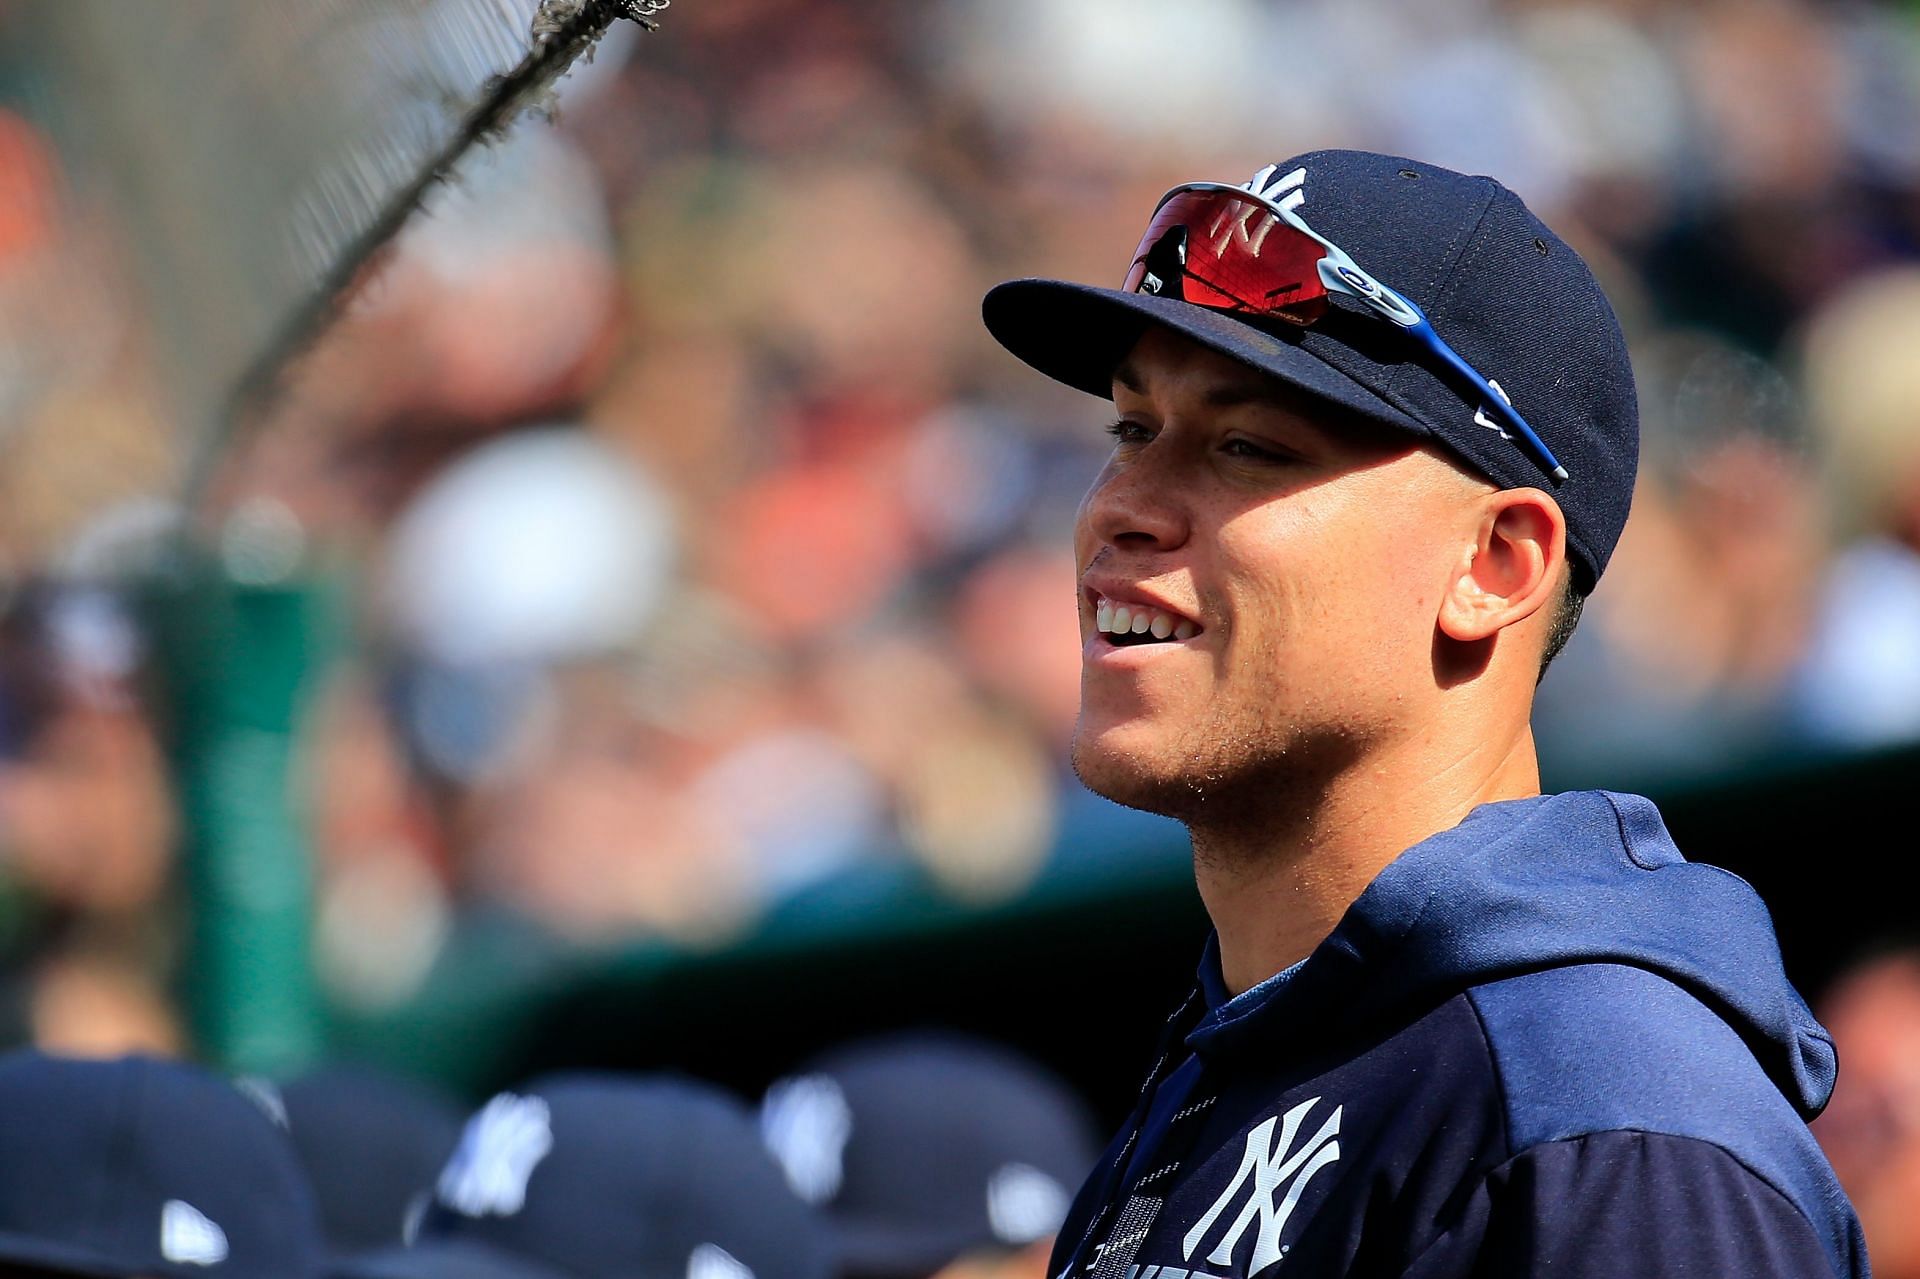 MLB Twitter astonished by Aaron Judge posing next to 7-foot NBA